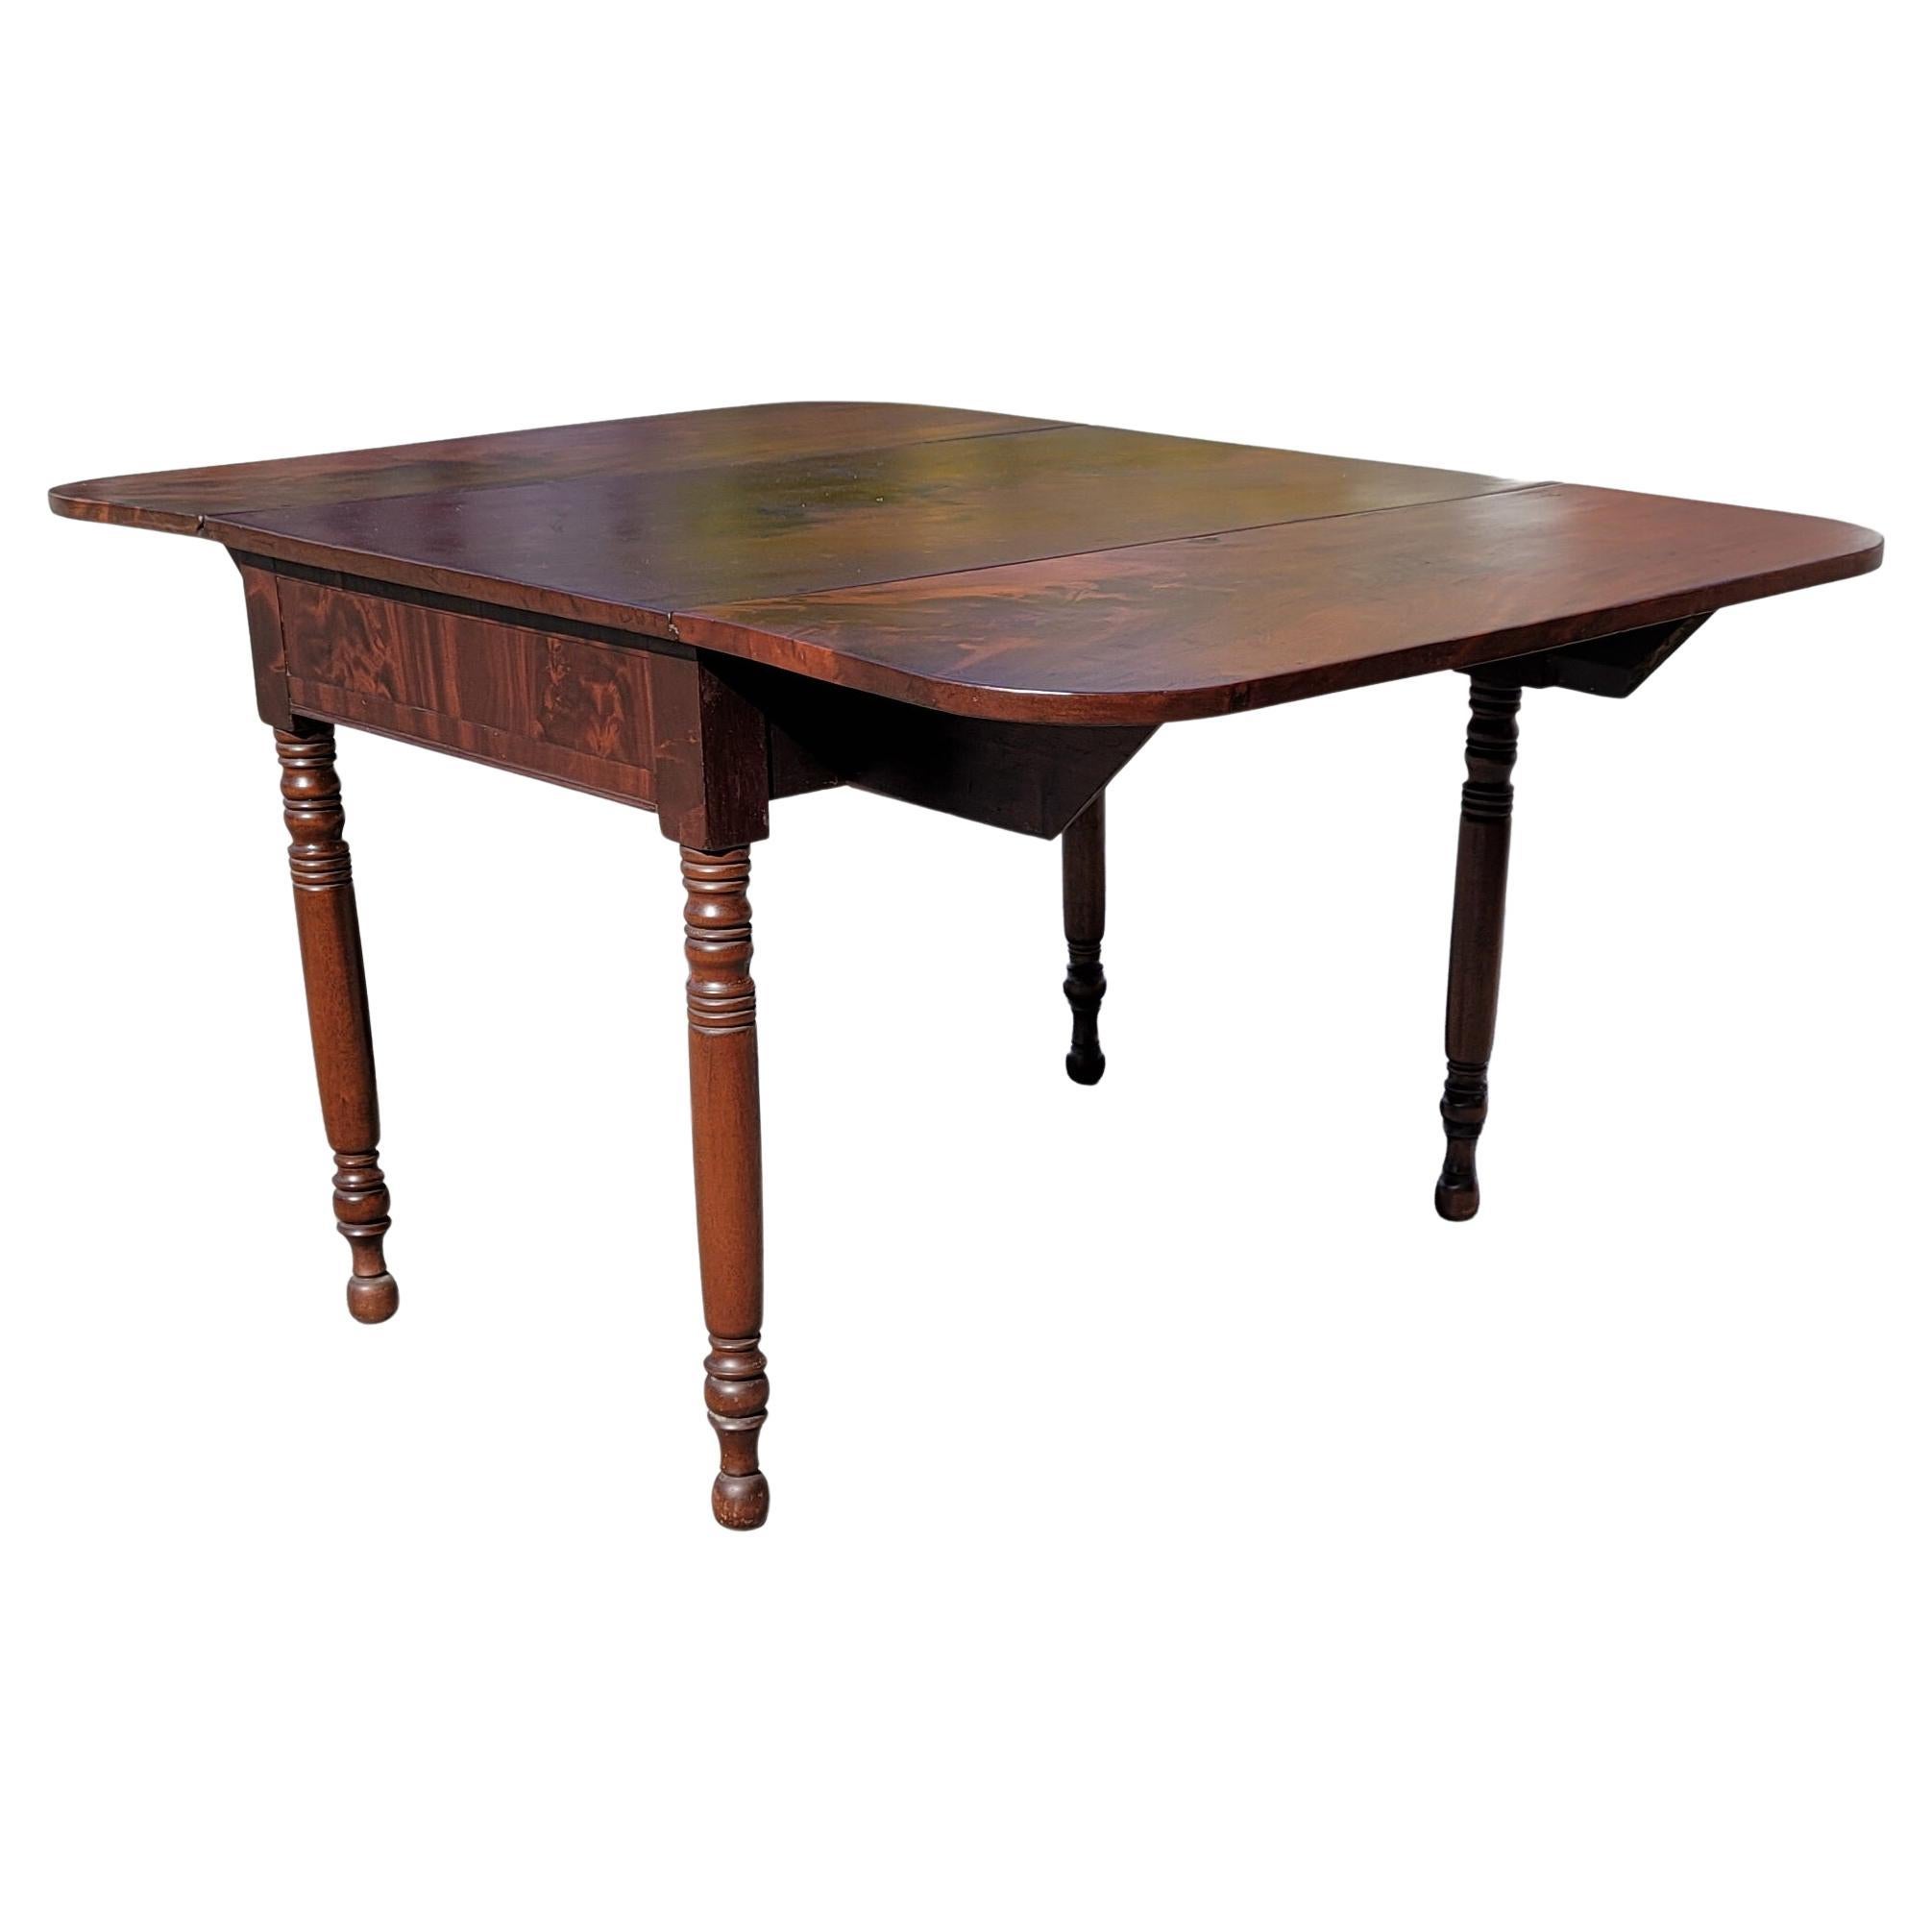 19th Century American Empire Federal Flame Mahogany Drop-Leaf Dining Table For Sale 4